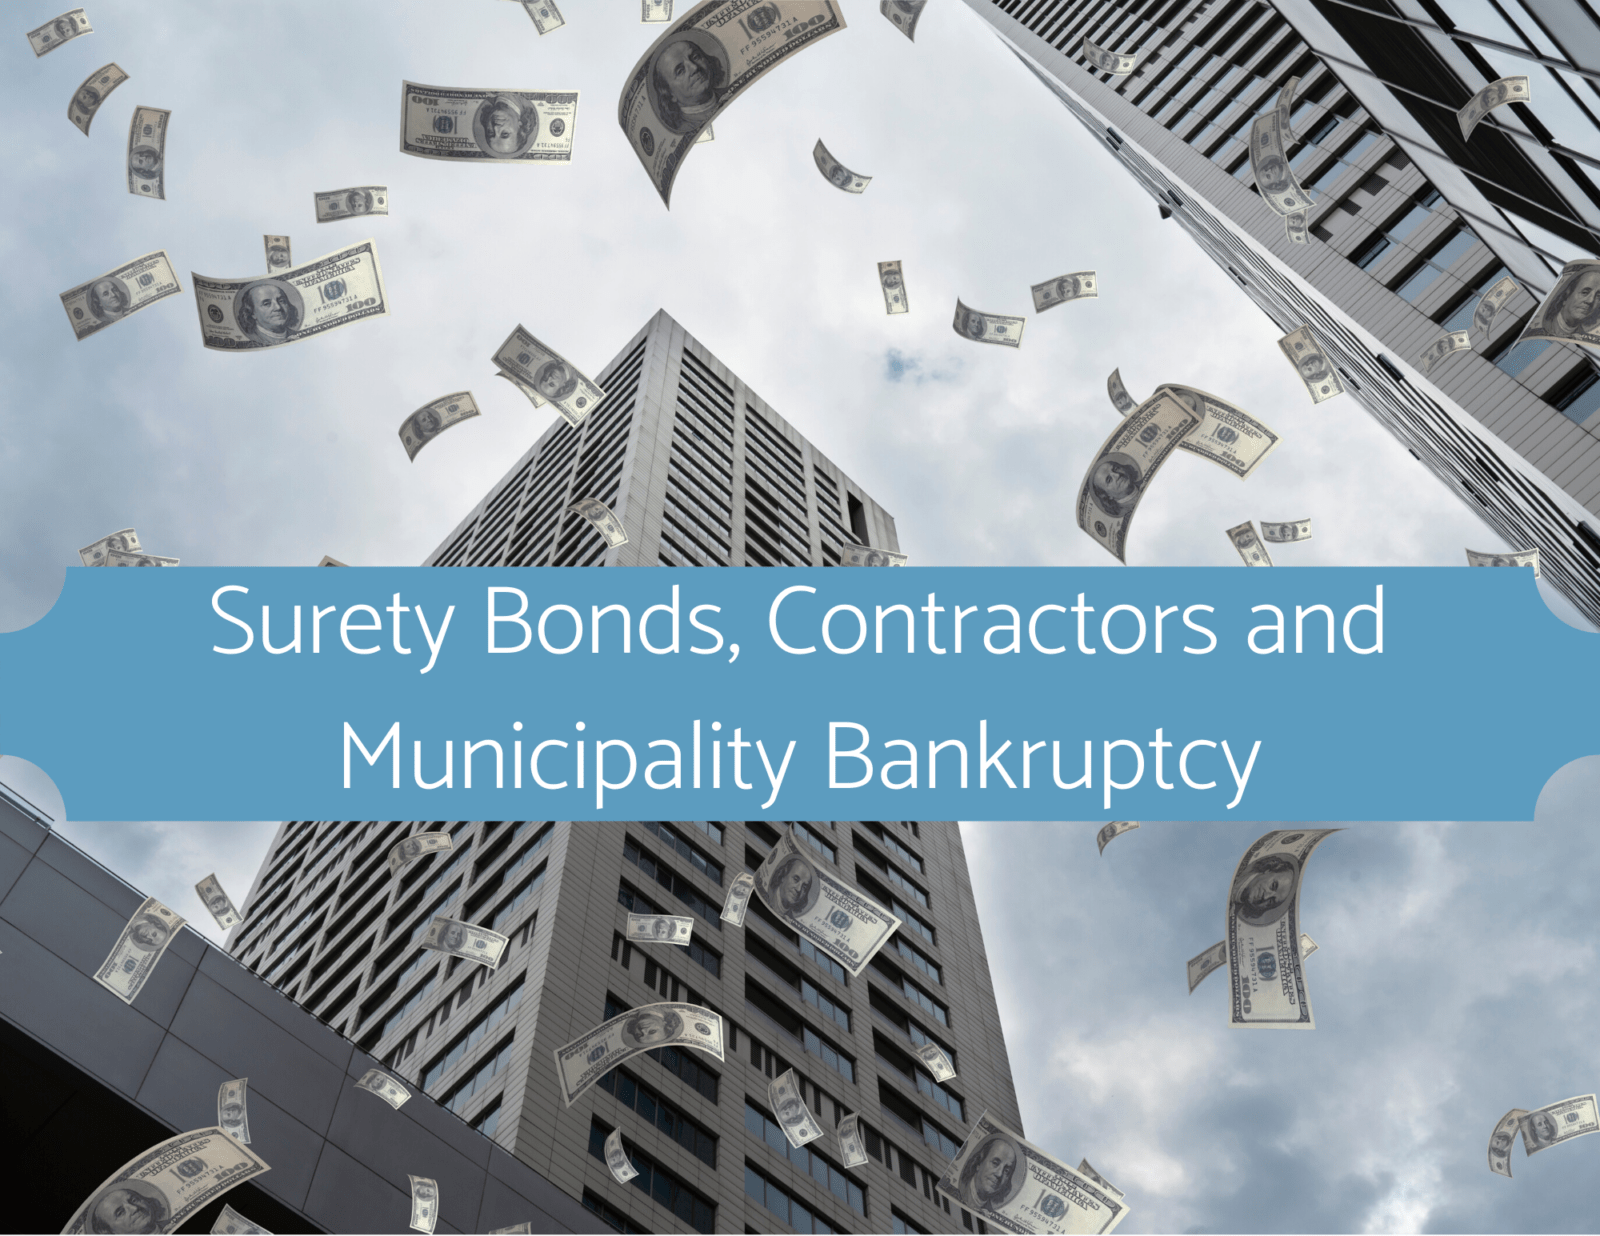 Surety bonds and municipality bankruptcy. The is a city with money falling from the sky.